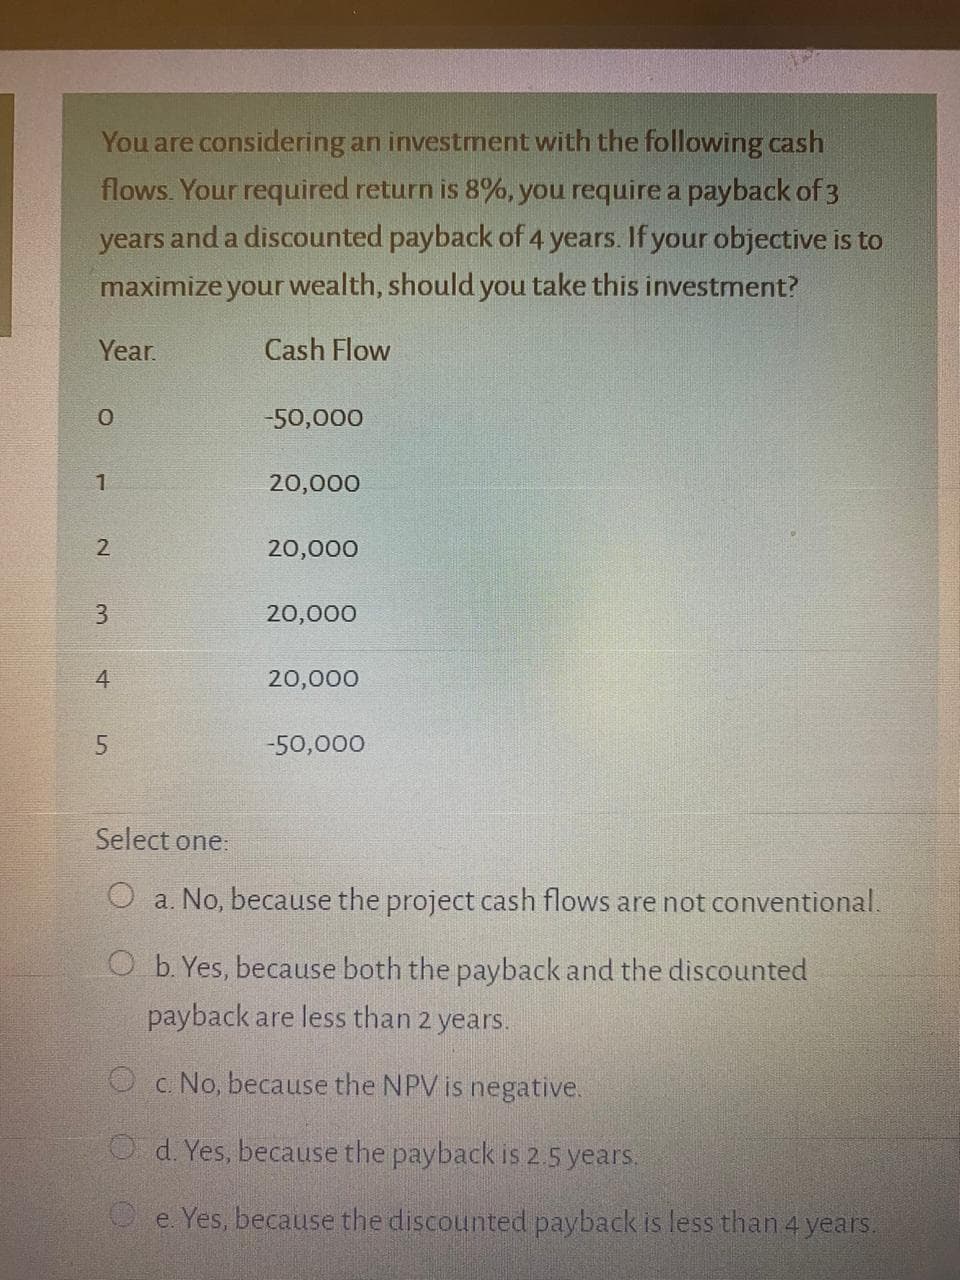 You are considering an investment with the following cash
flows. Your required return is 8%, you require a payback of 3
years and a discounted payback of 4 years. If your objective is to
maximize your wealth, should you take this investment?
Year.
Cash Flow
-50,000
20,000
20,000
3
20,000
4
20,000
-50,000
Select one:
O a. No, because the project cash flows are not conventional.
O b. Yes, because both the payback and the discounted
payback are less than 2 years.
O c. No, because the NPV is negative.
O d. Yes, because the payback is 2.5 years.
O e. Yes, because the discounted payback is less than 4 years.
